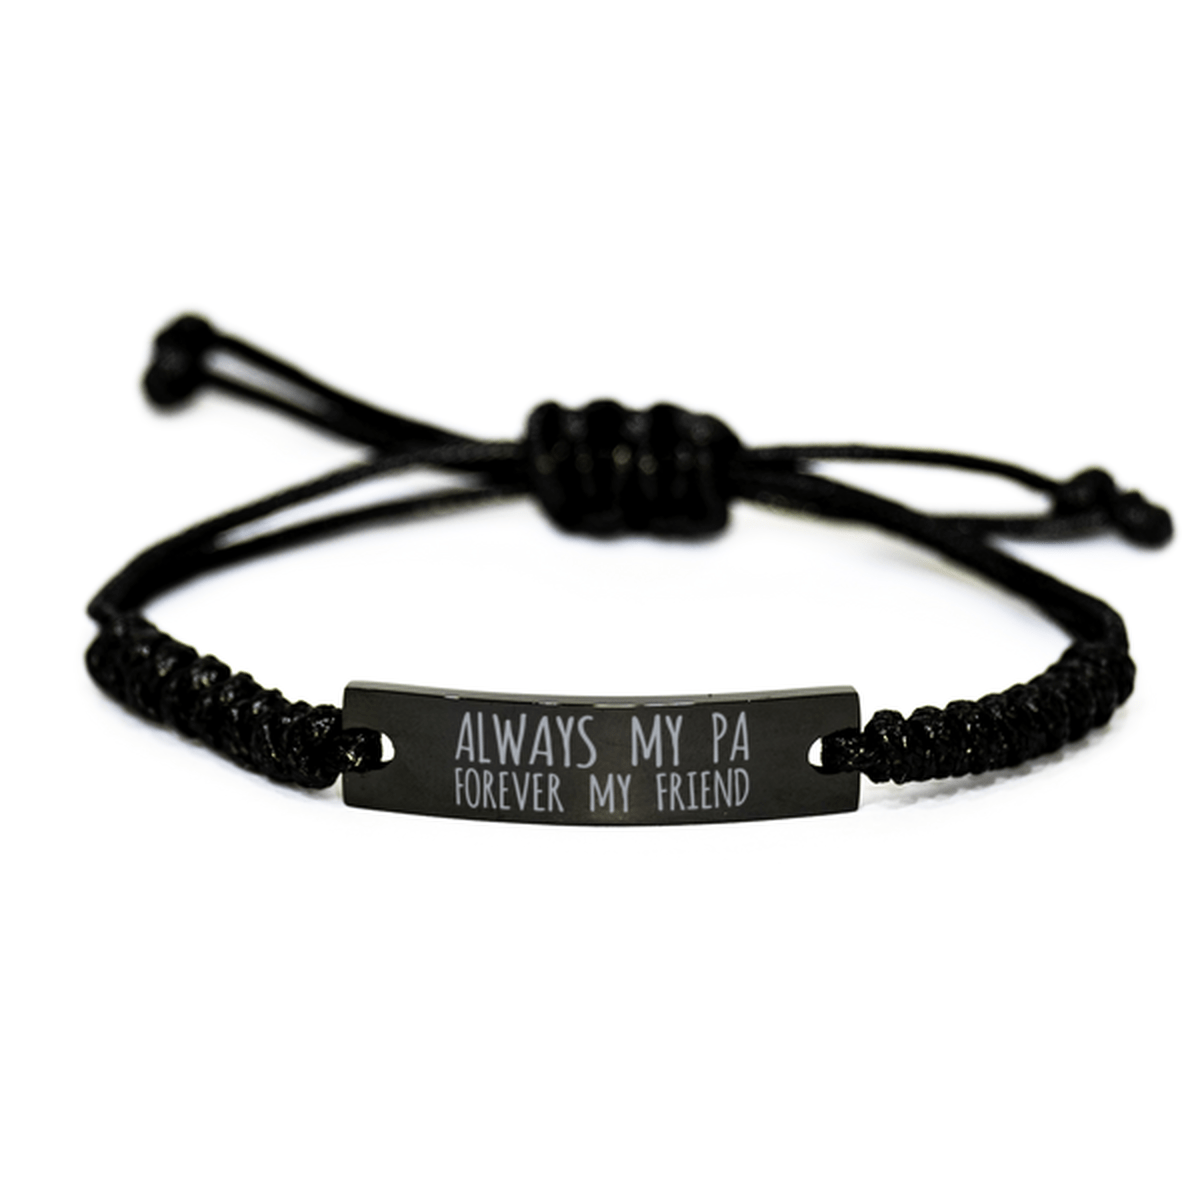 Inspirational Pa Black Rope Bracelet, Always My Pa Forever My Friend, Best Birthday Gifts For Family